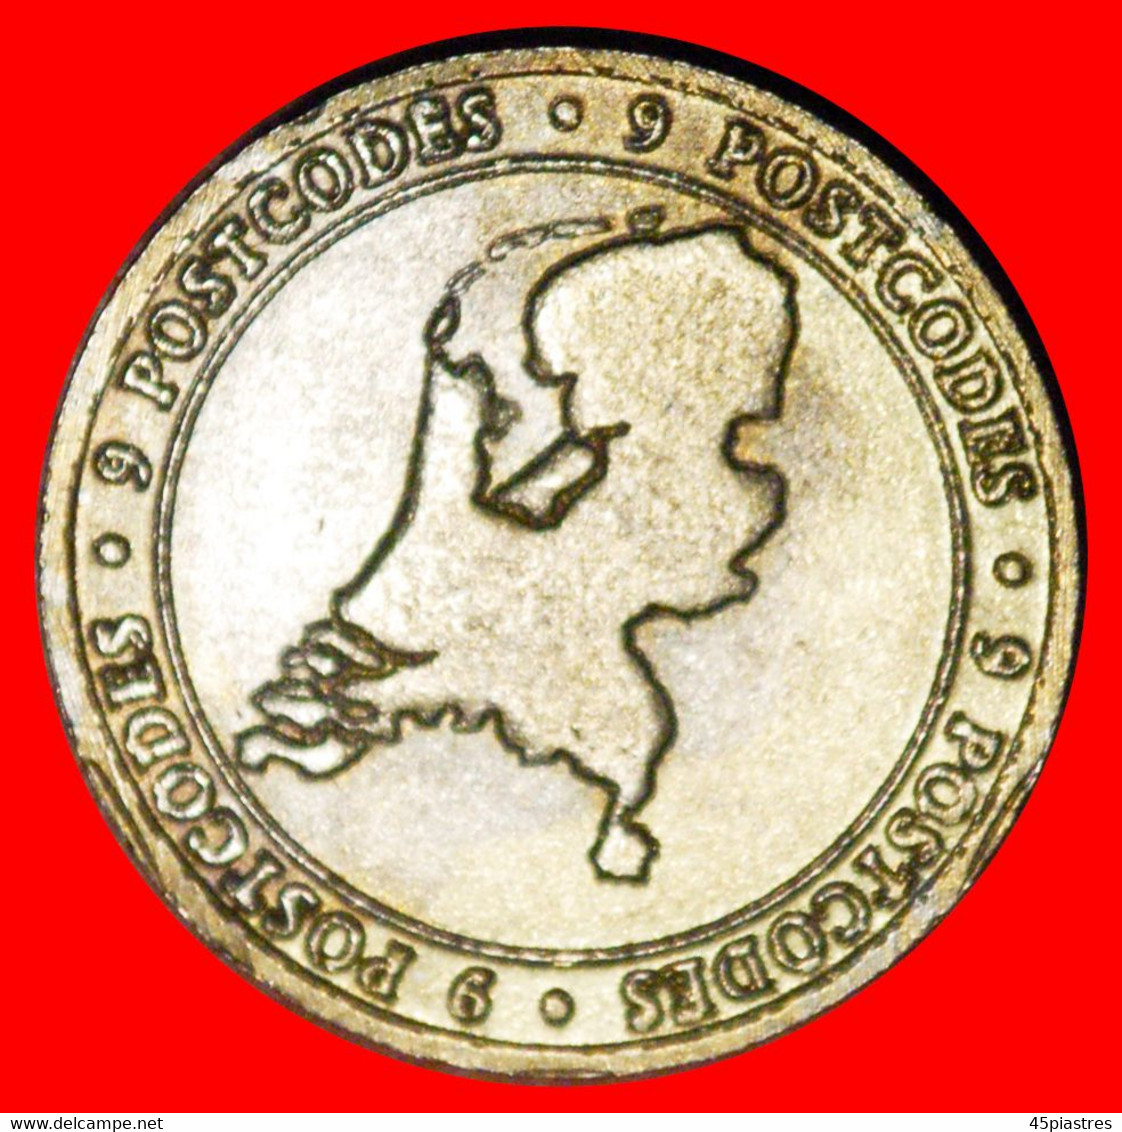 * NATIONAL POSTCODE LOTTERY: NETHERLANDS ★ €48000000 2012! 9 POSTCODES! LOW START ★ NO RESERVE! - Professionals/Firms